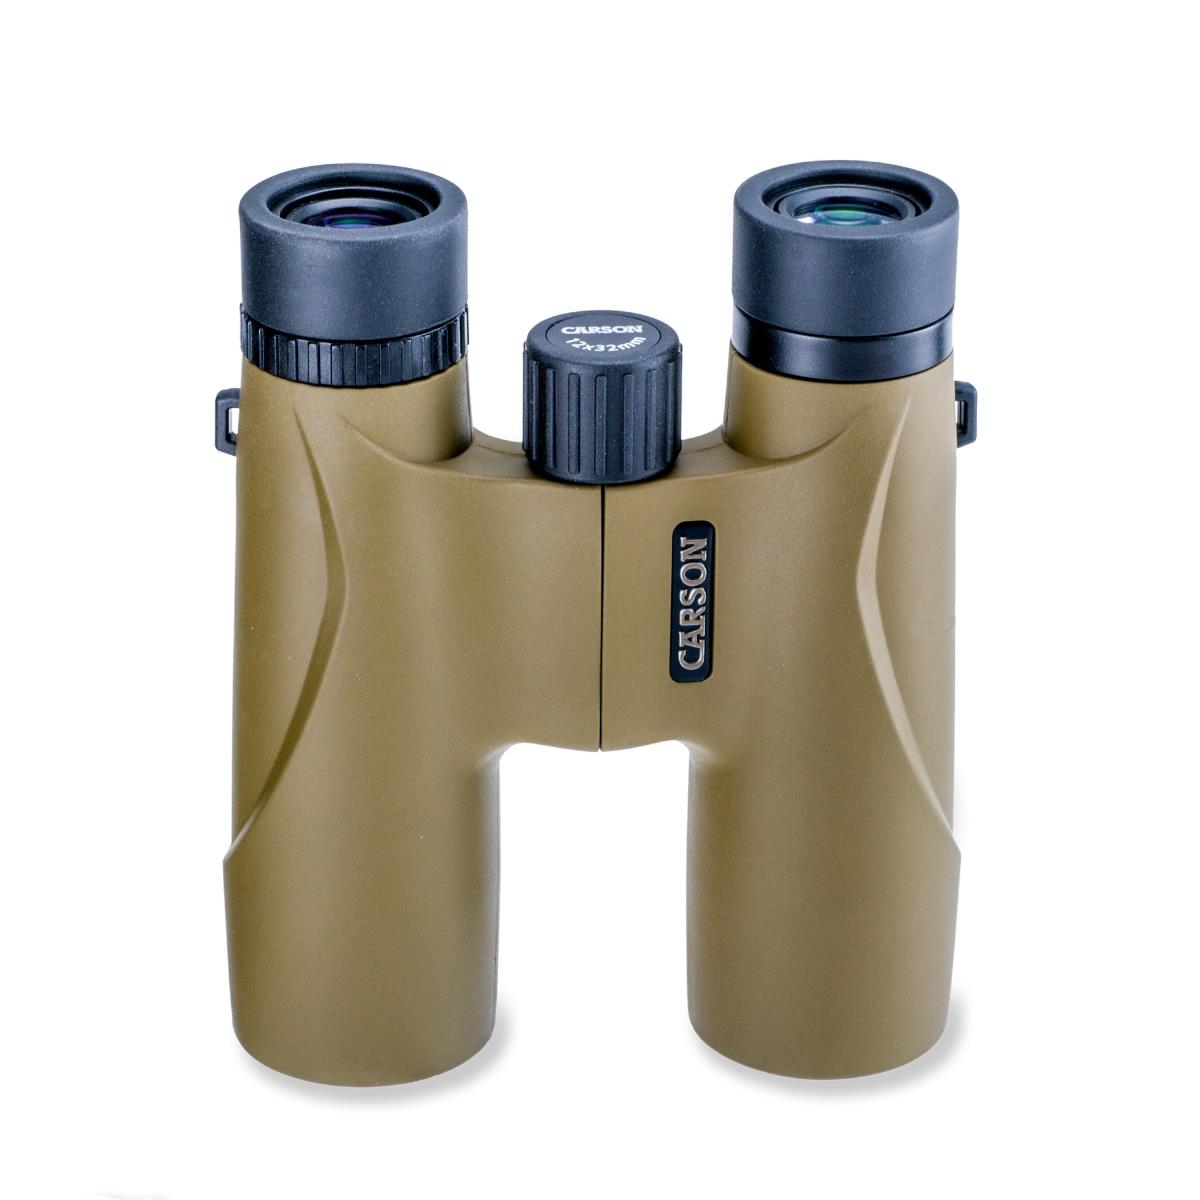 Picture of Carson HW-232 12 x 32 mm Stinger Compact Binocular